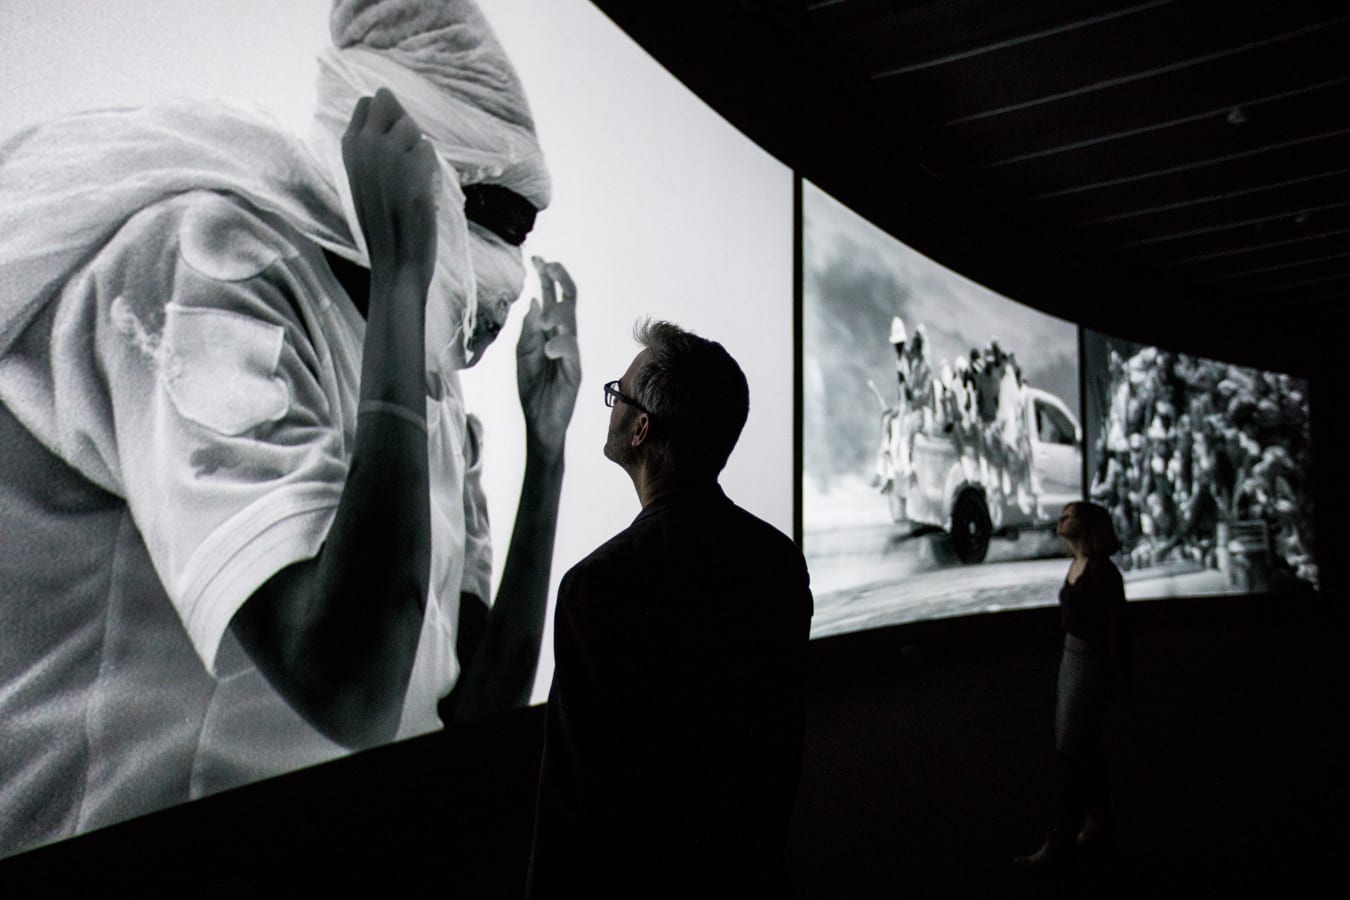 1. Richard Mosse Incoming, The Curve, Barbican Centre, Tristan Fewings (6)